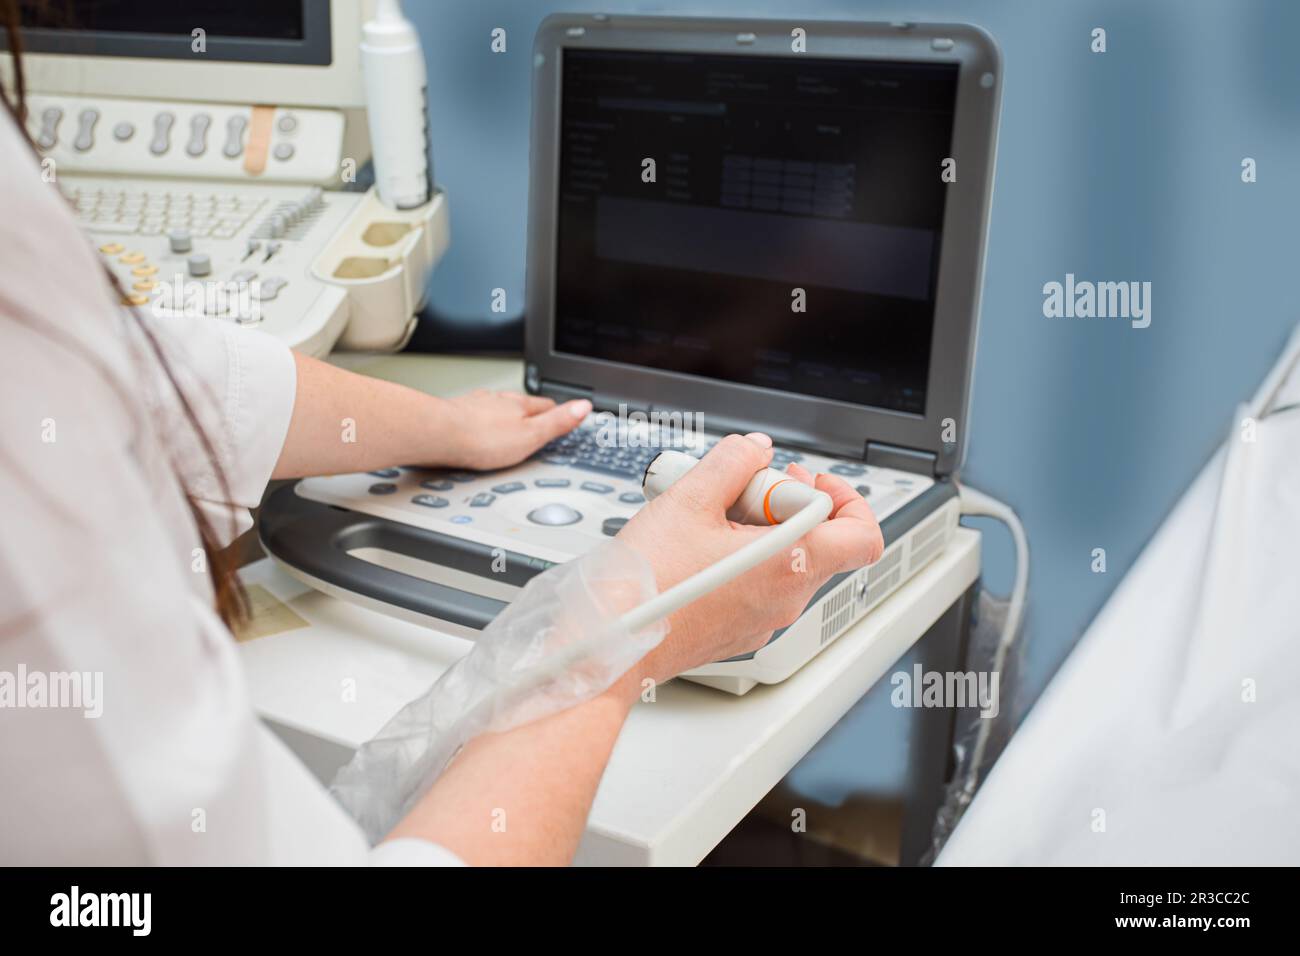 Doctor's hands operating modern portable medical equipment Stock Photo